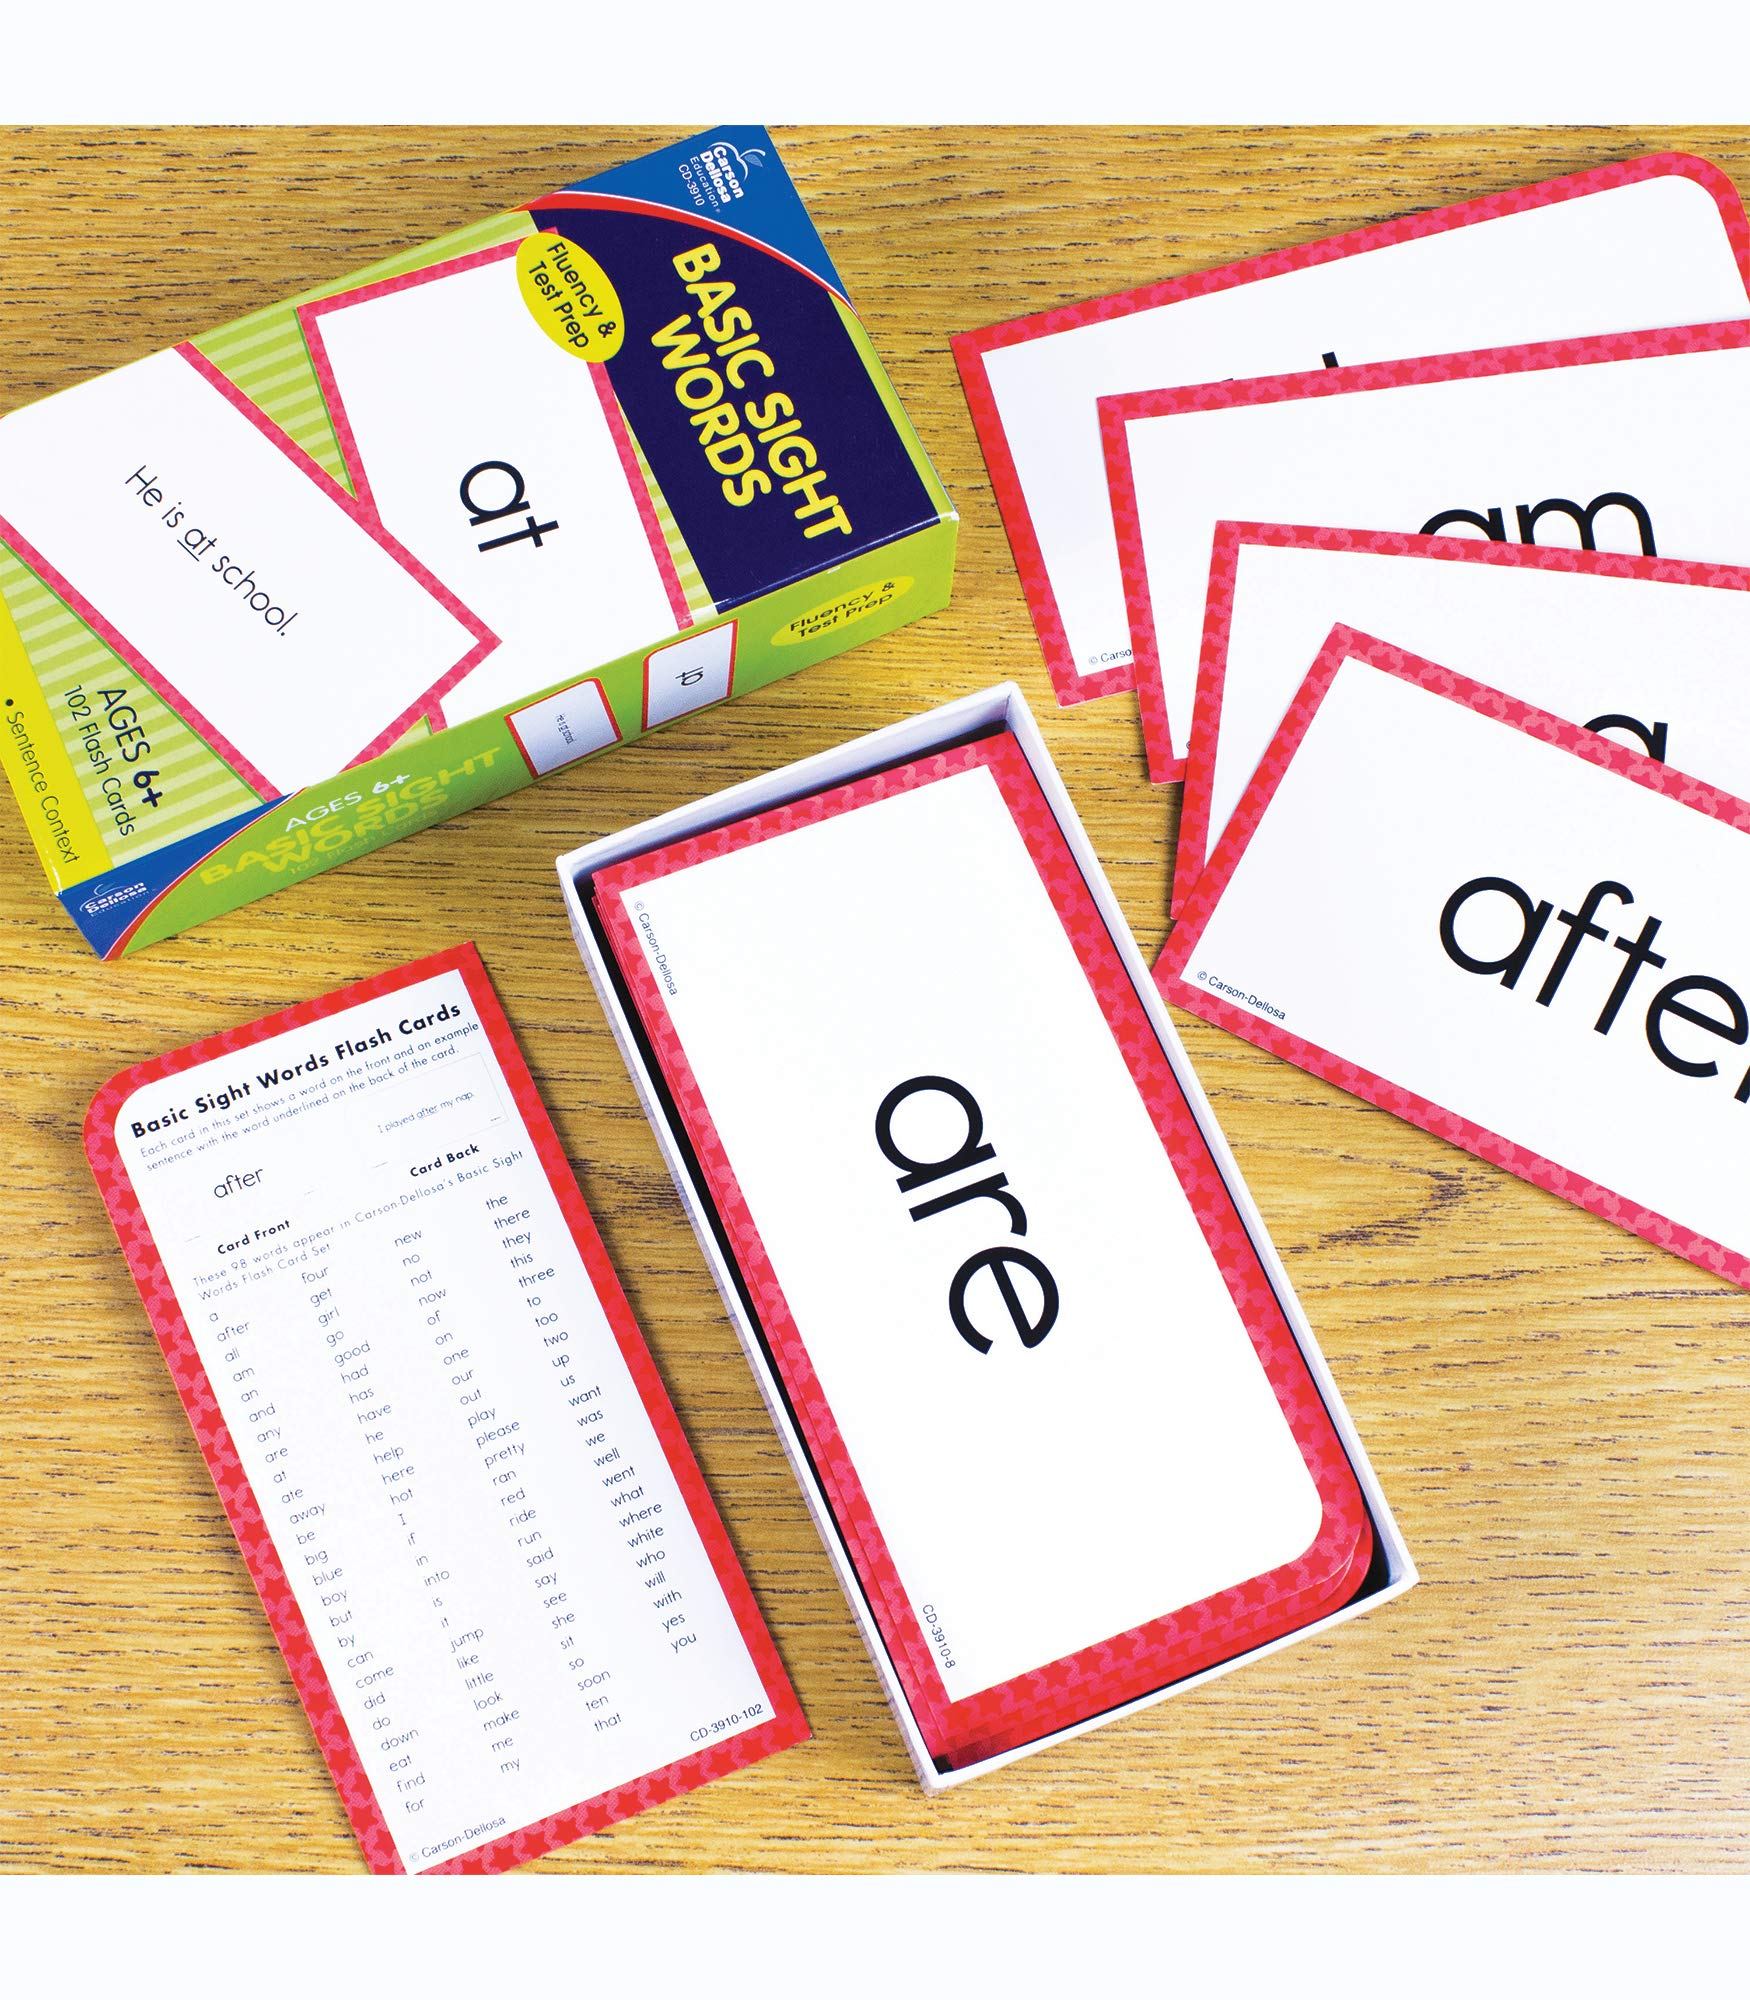 Carson Dellosa Sight Words Flash Cards Kindergarten, 1st, 2nd Grade for Kids Ages 6+, Phonics Flash Cards, Dolch and Fry High Frequency Sight Words